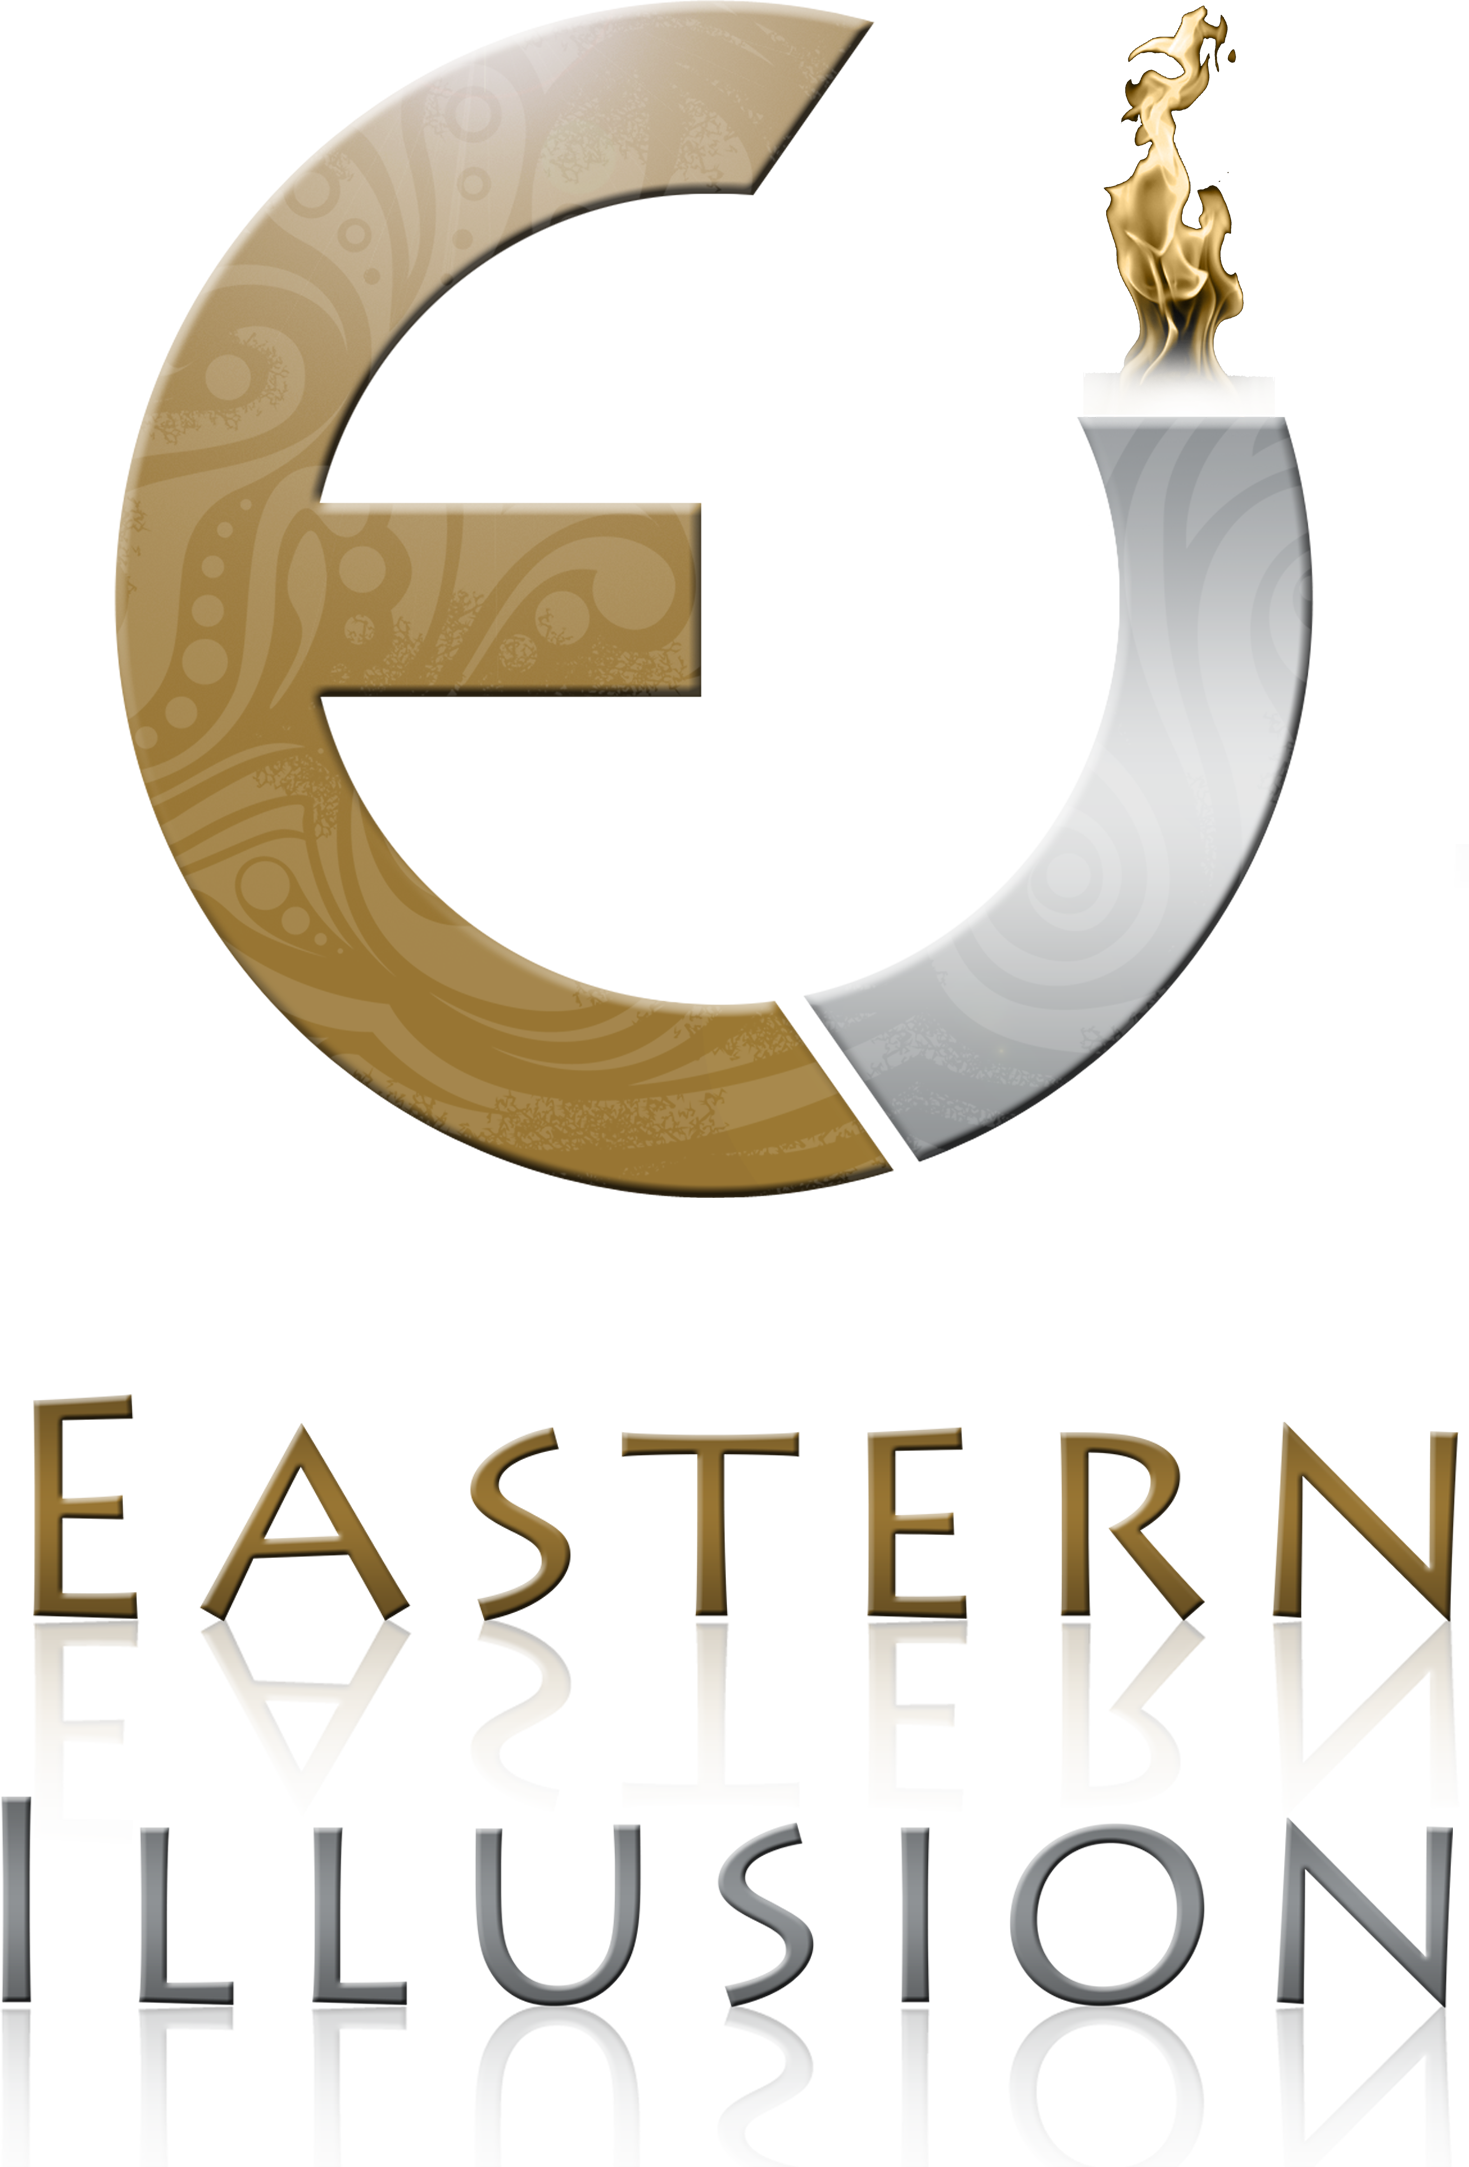 Eastern Illusion -  Live Asian Music and Events Management Company